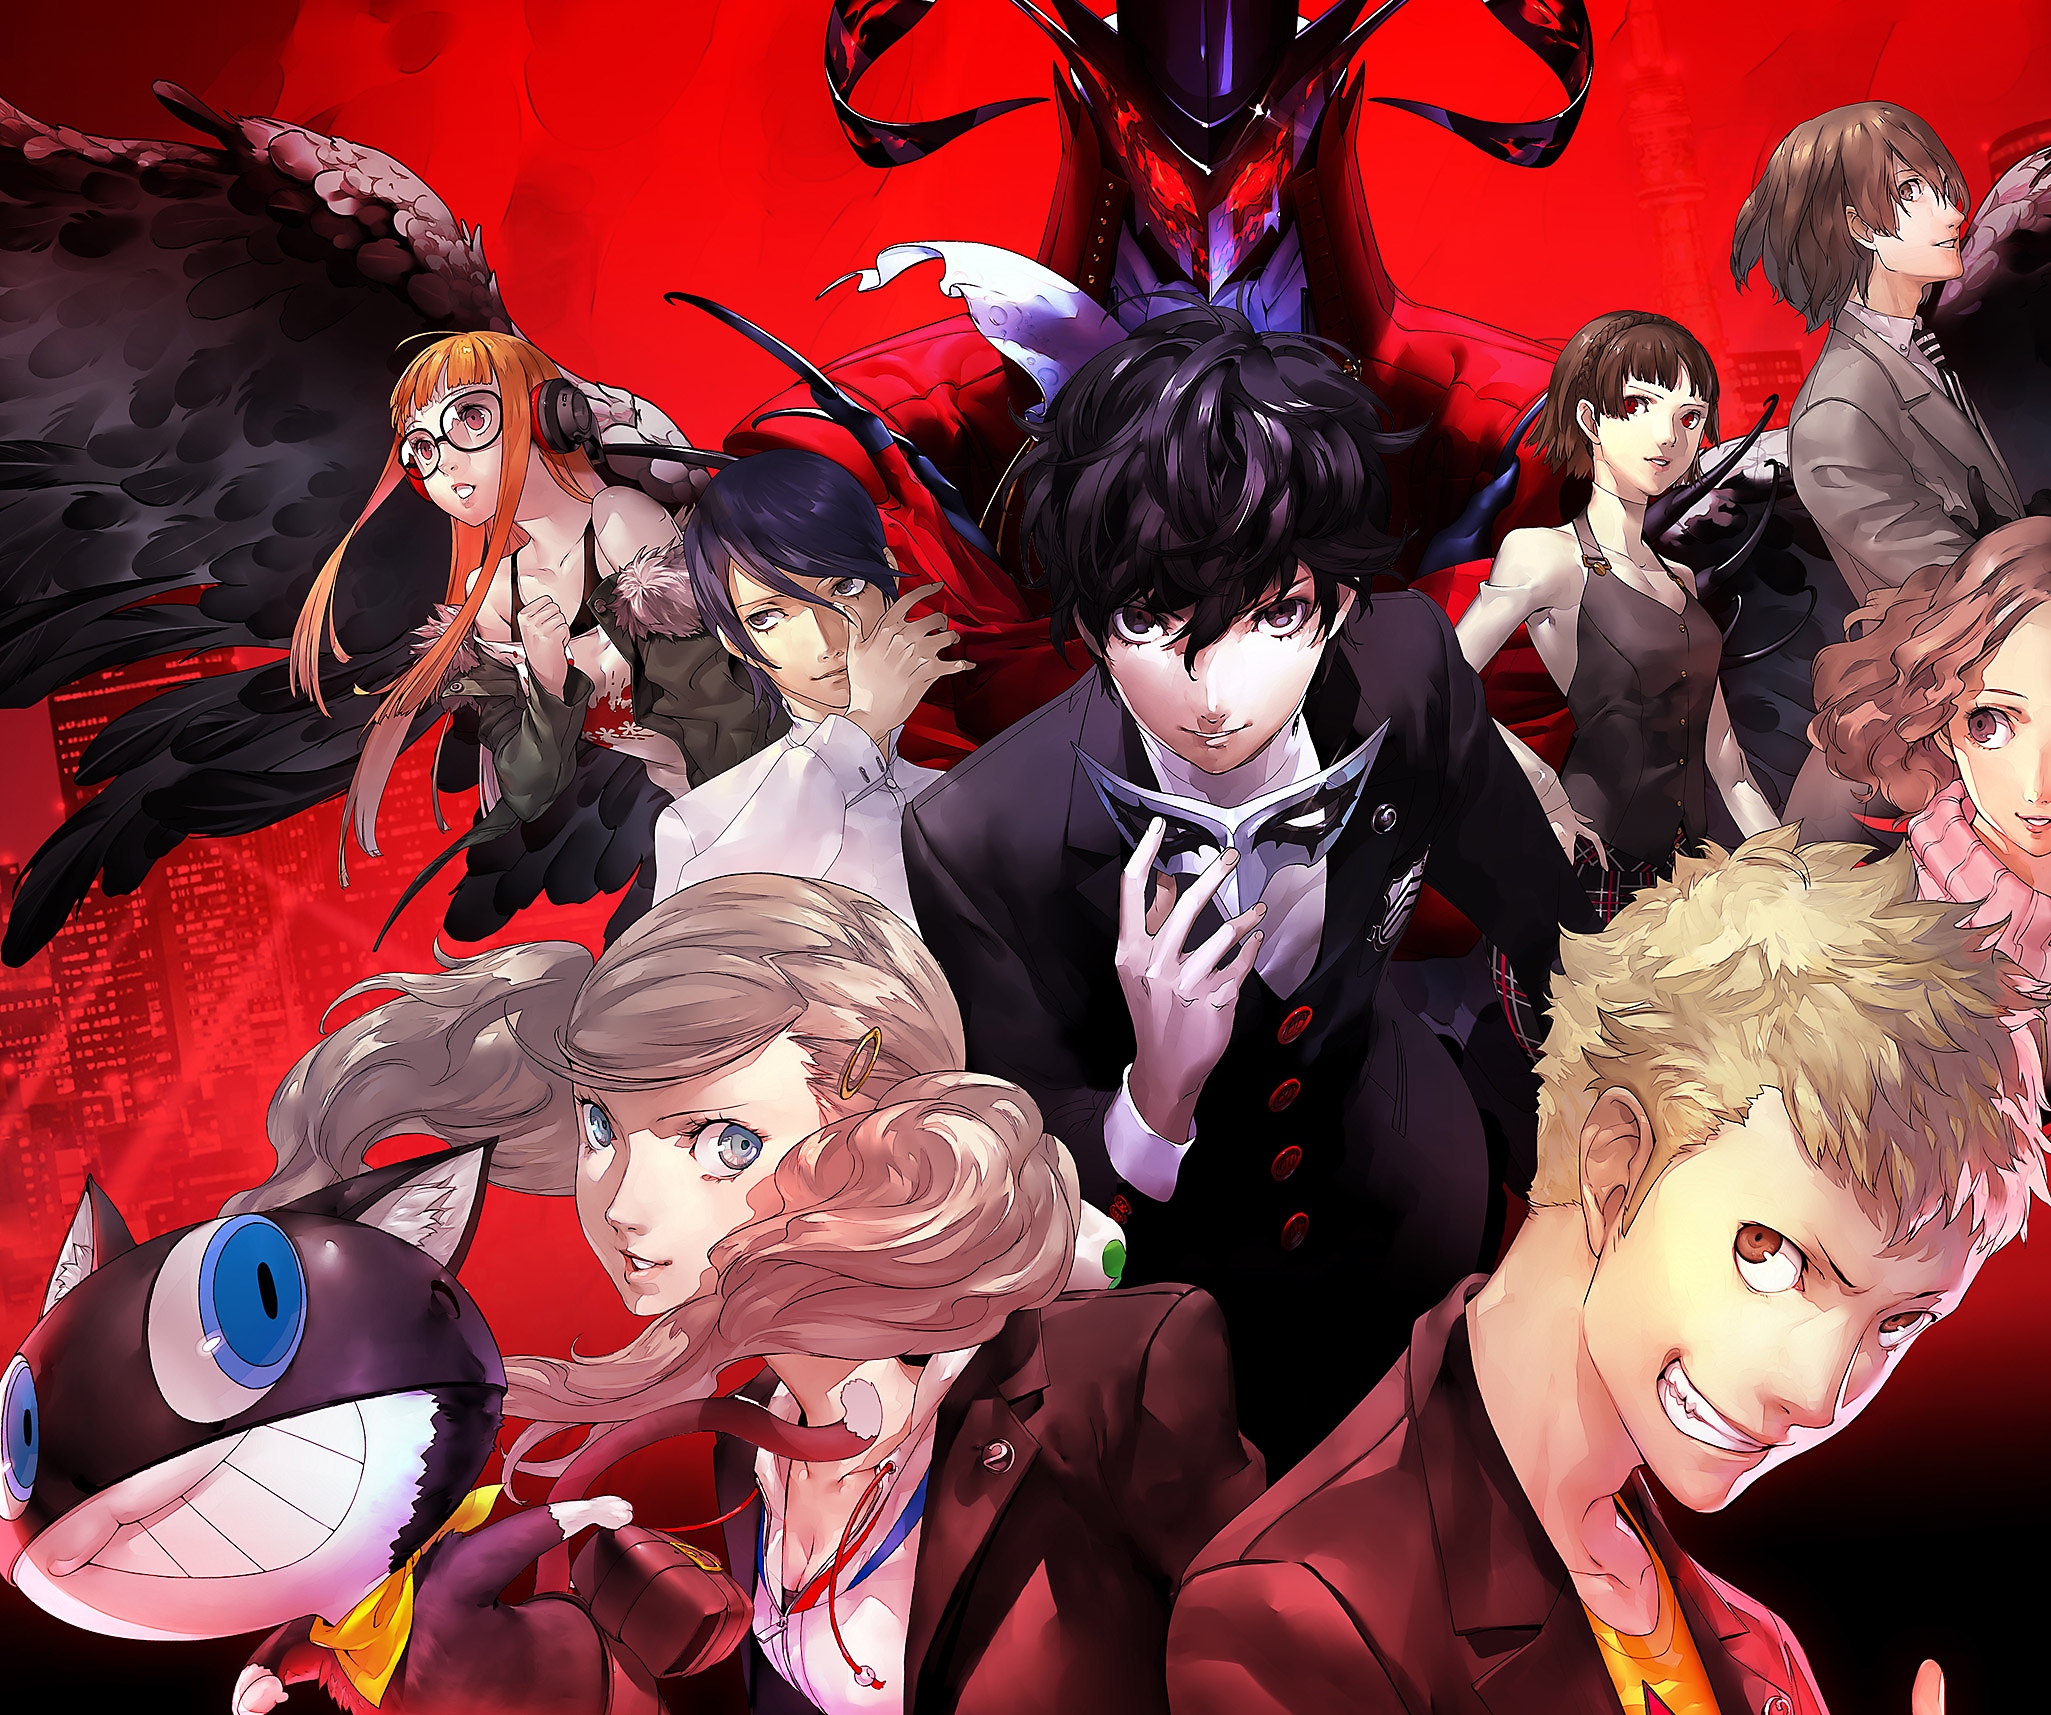 Persona 5 key art showing a group shot of the main characters against a red background.